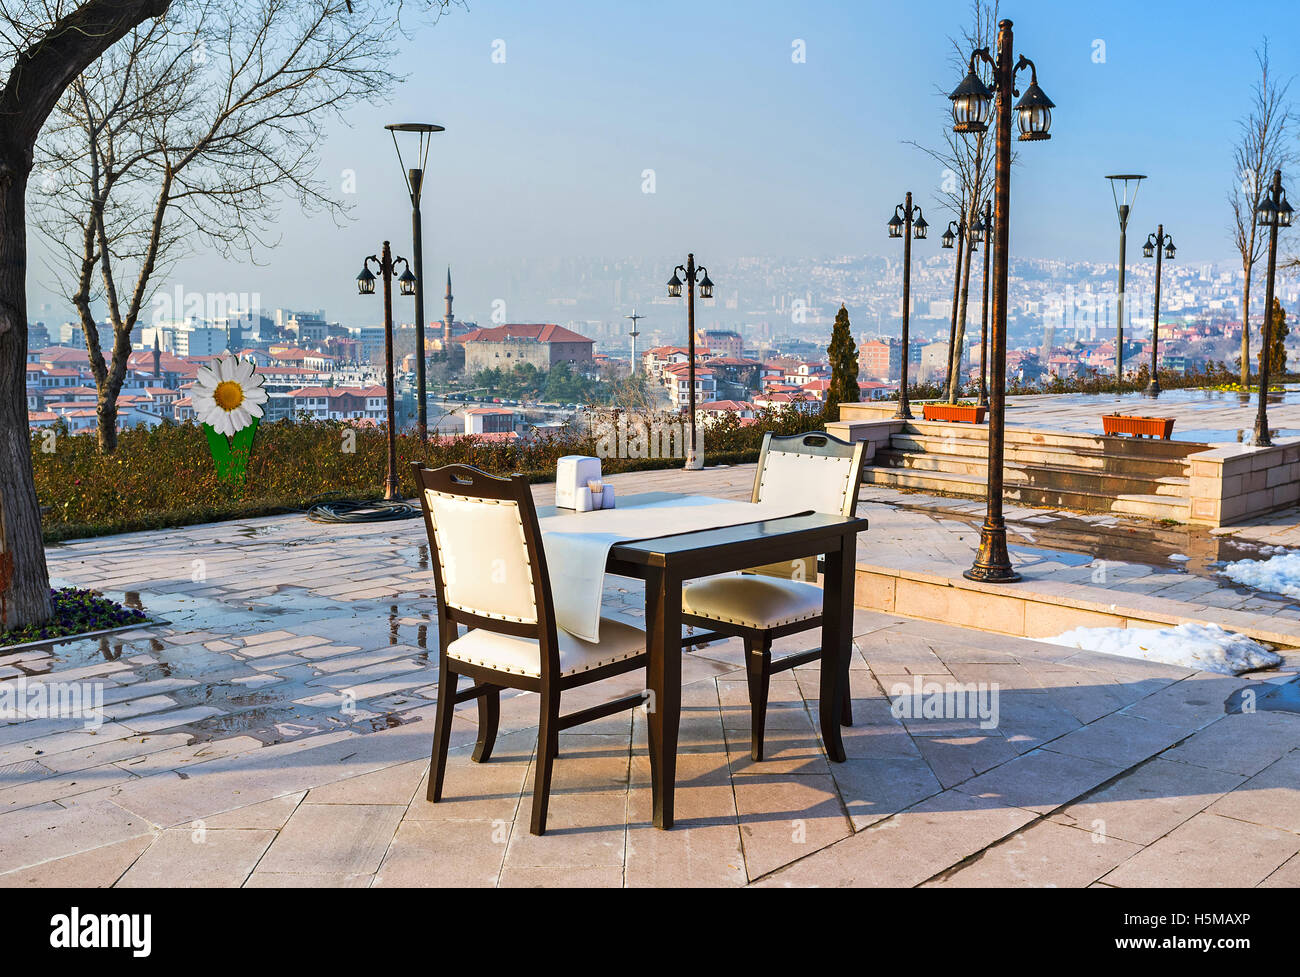 The outdoor restaurant on the Castle Hill overlooks the lower town with the Haci Bayram Mosque on adjacent hill, Ankara, Turkey. Stock Photo